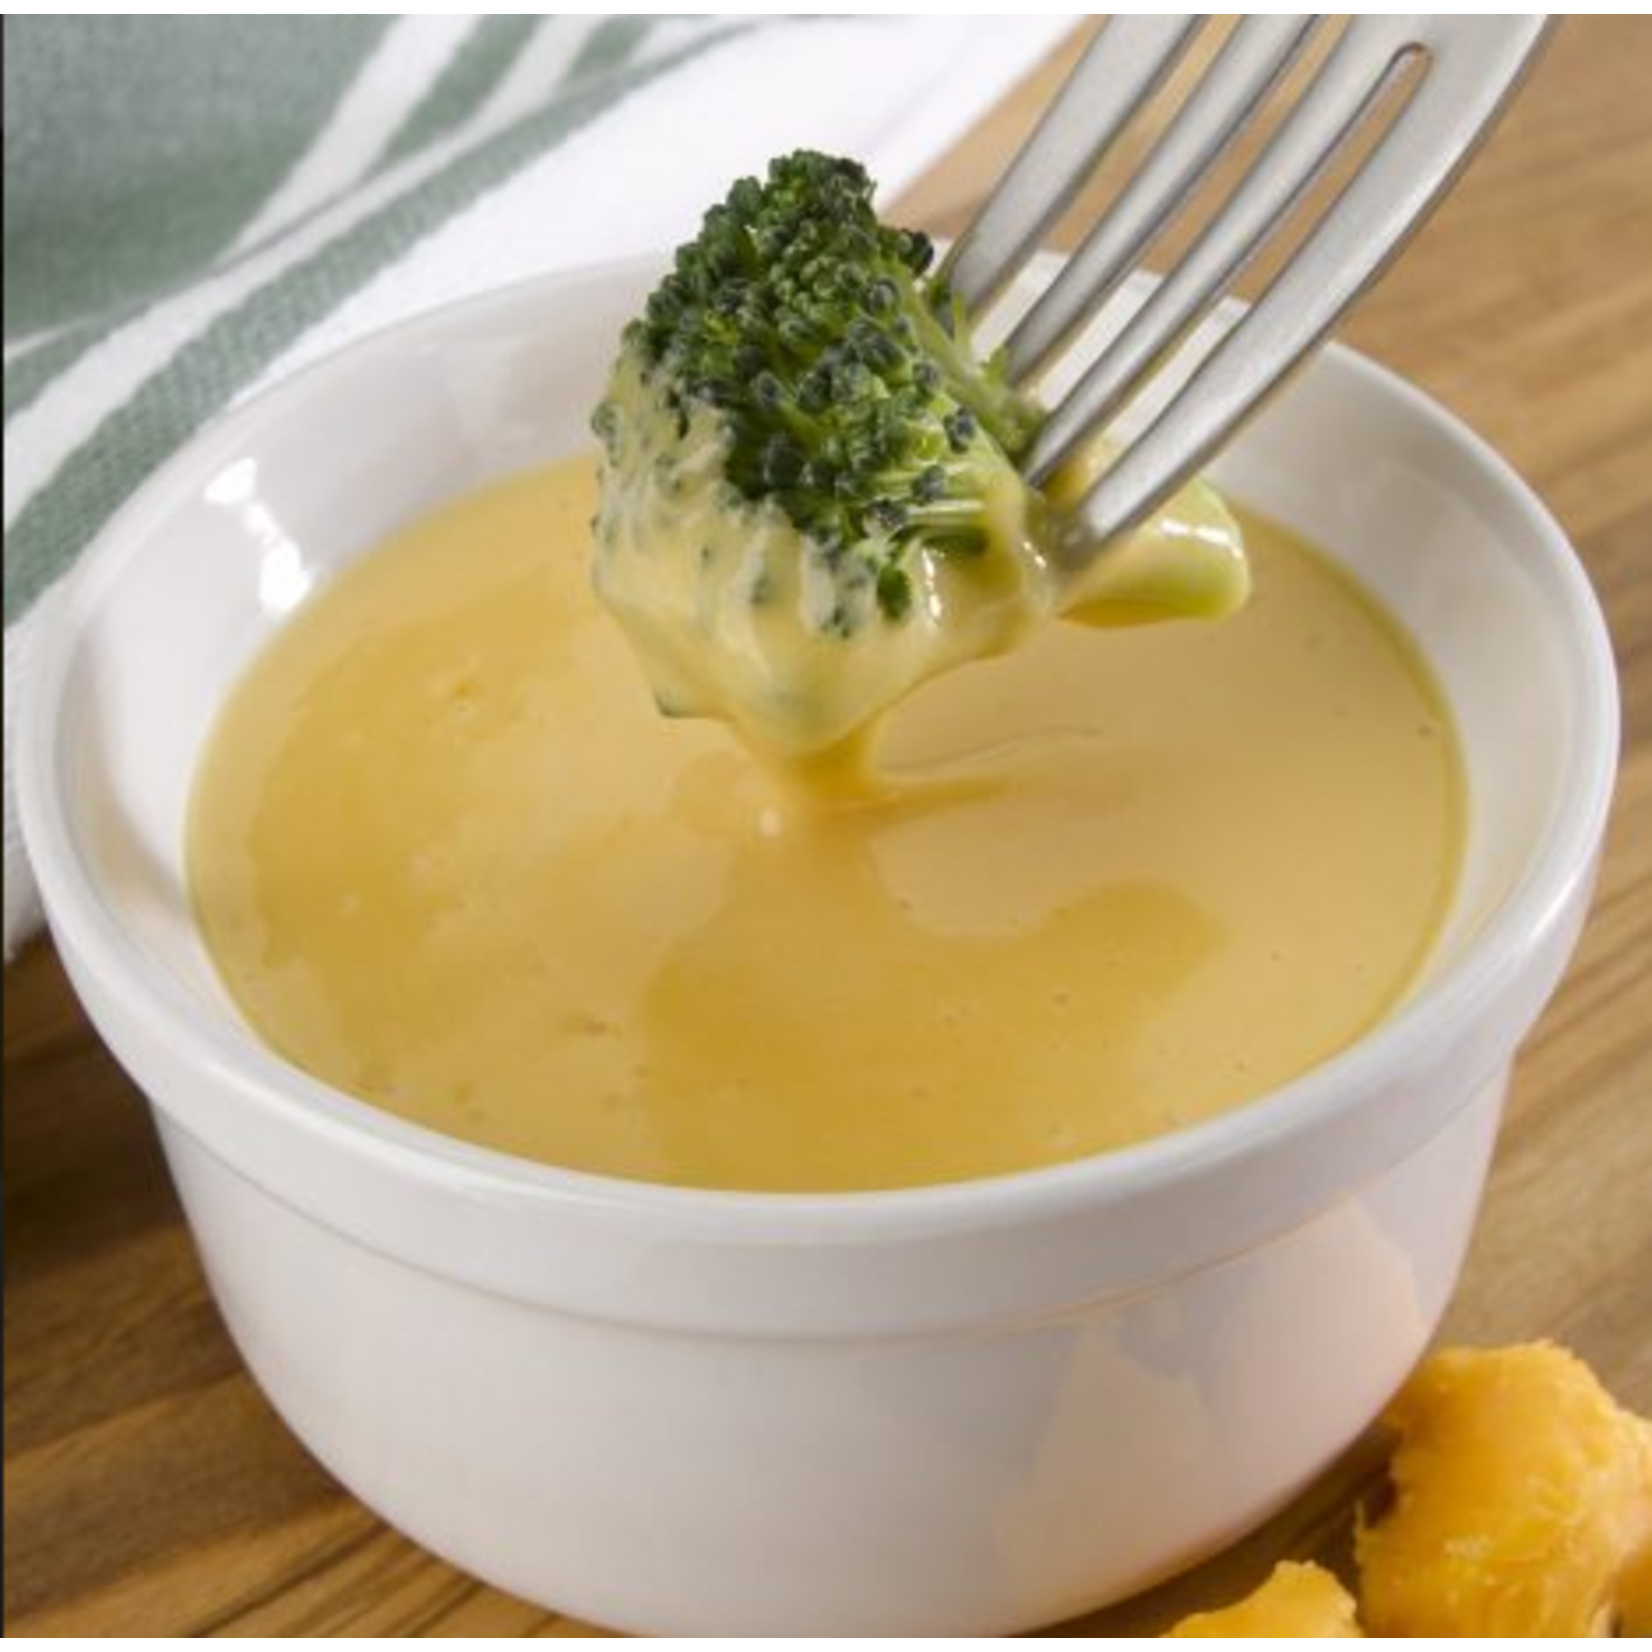 Cheddar Cheese Soup/Dip/Sauce